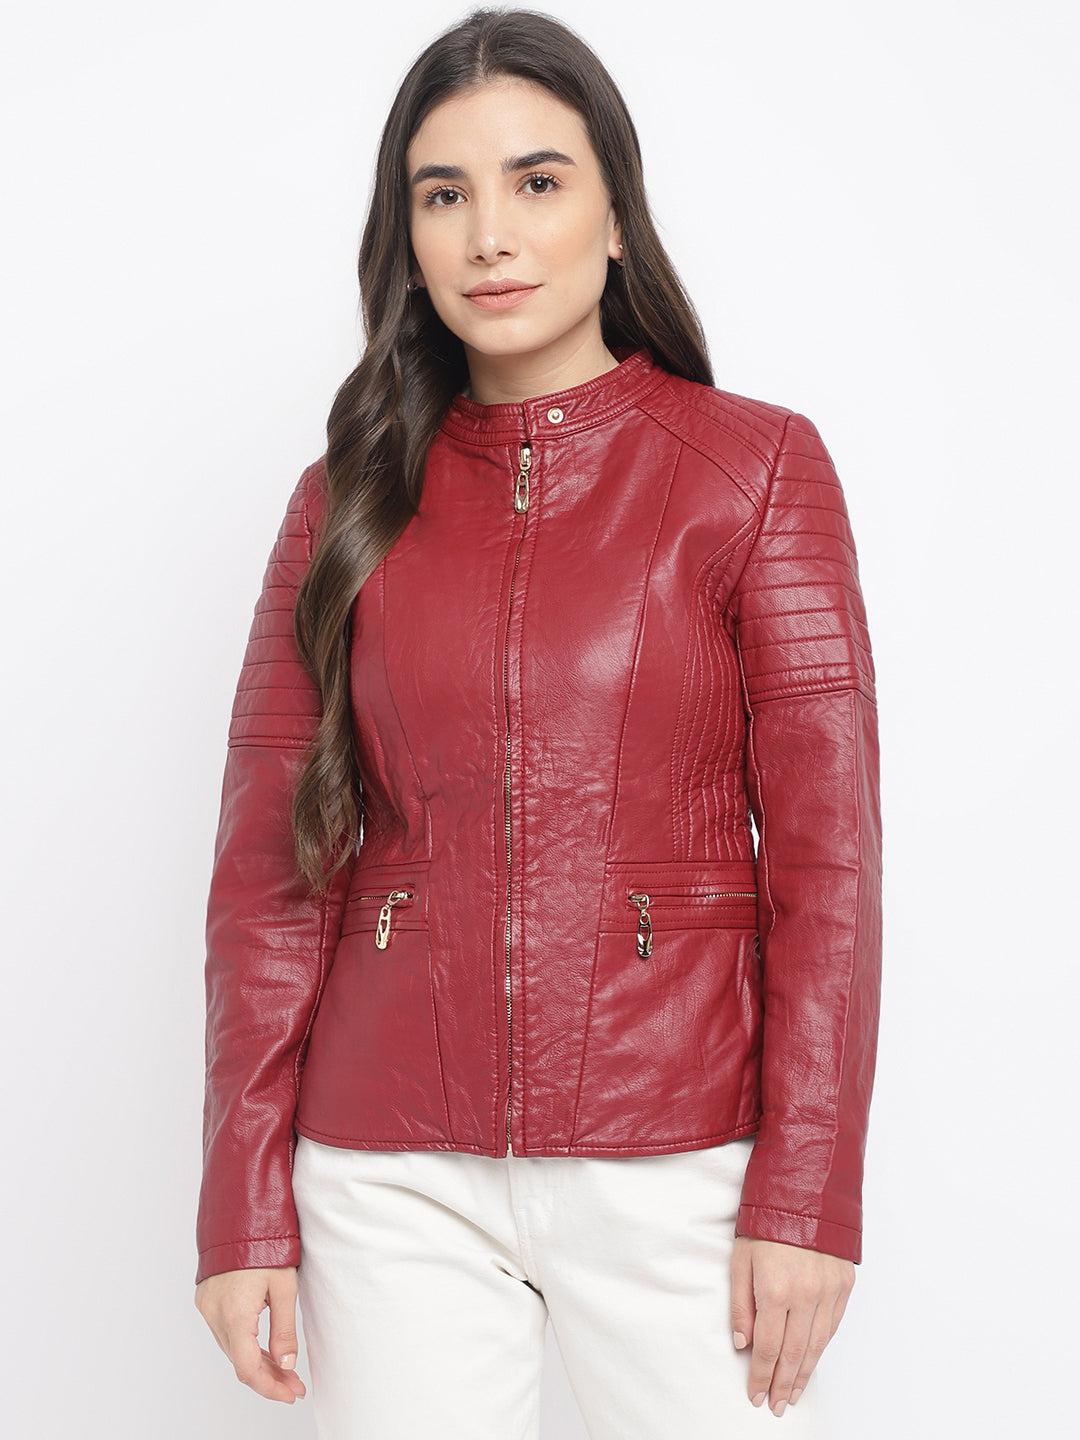 Louis Vuitton - Authenticated Jacket - Leather Burgundy Plain for Women, Very Good Condition